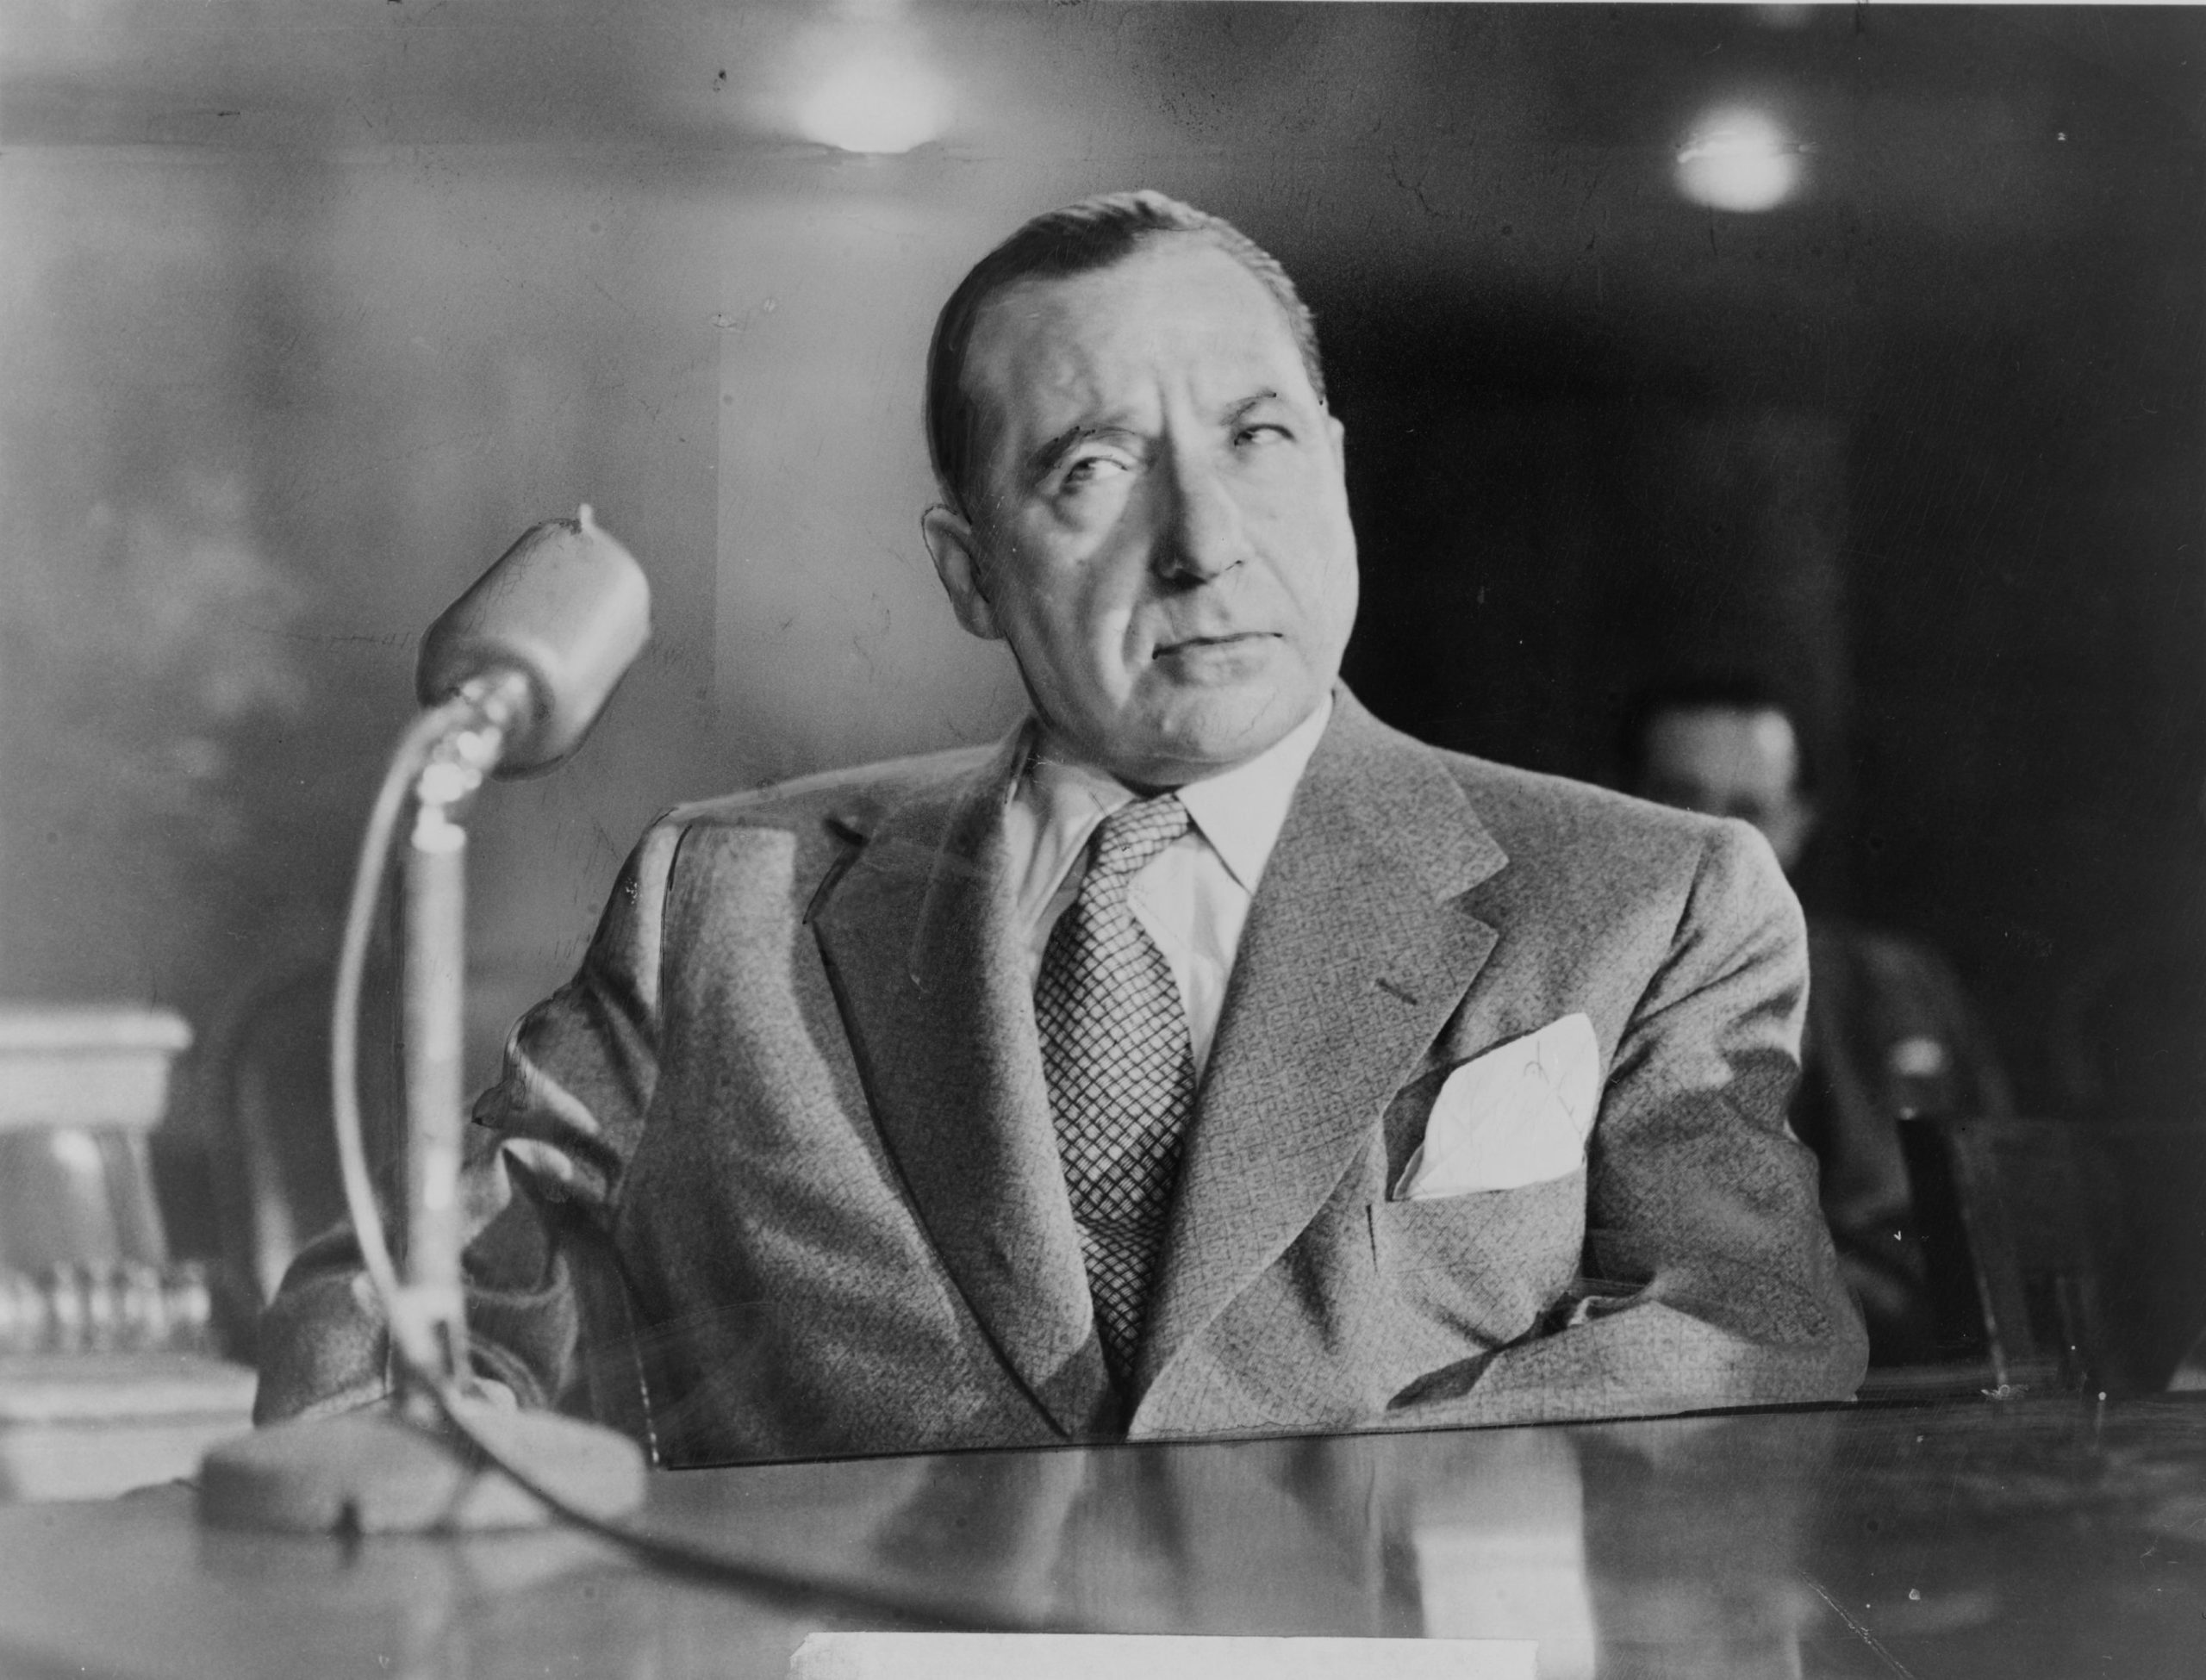 American mobster Frank Costello in 1951 testifying before the Kefauver Committee investigating organized crime.